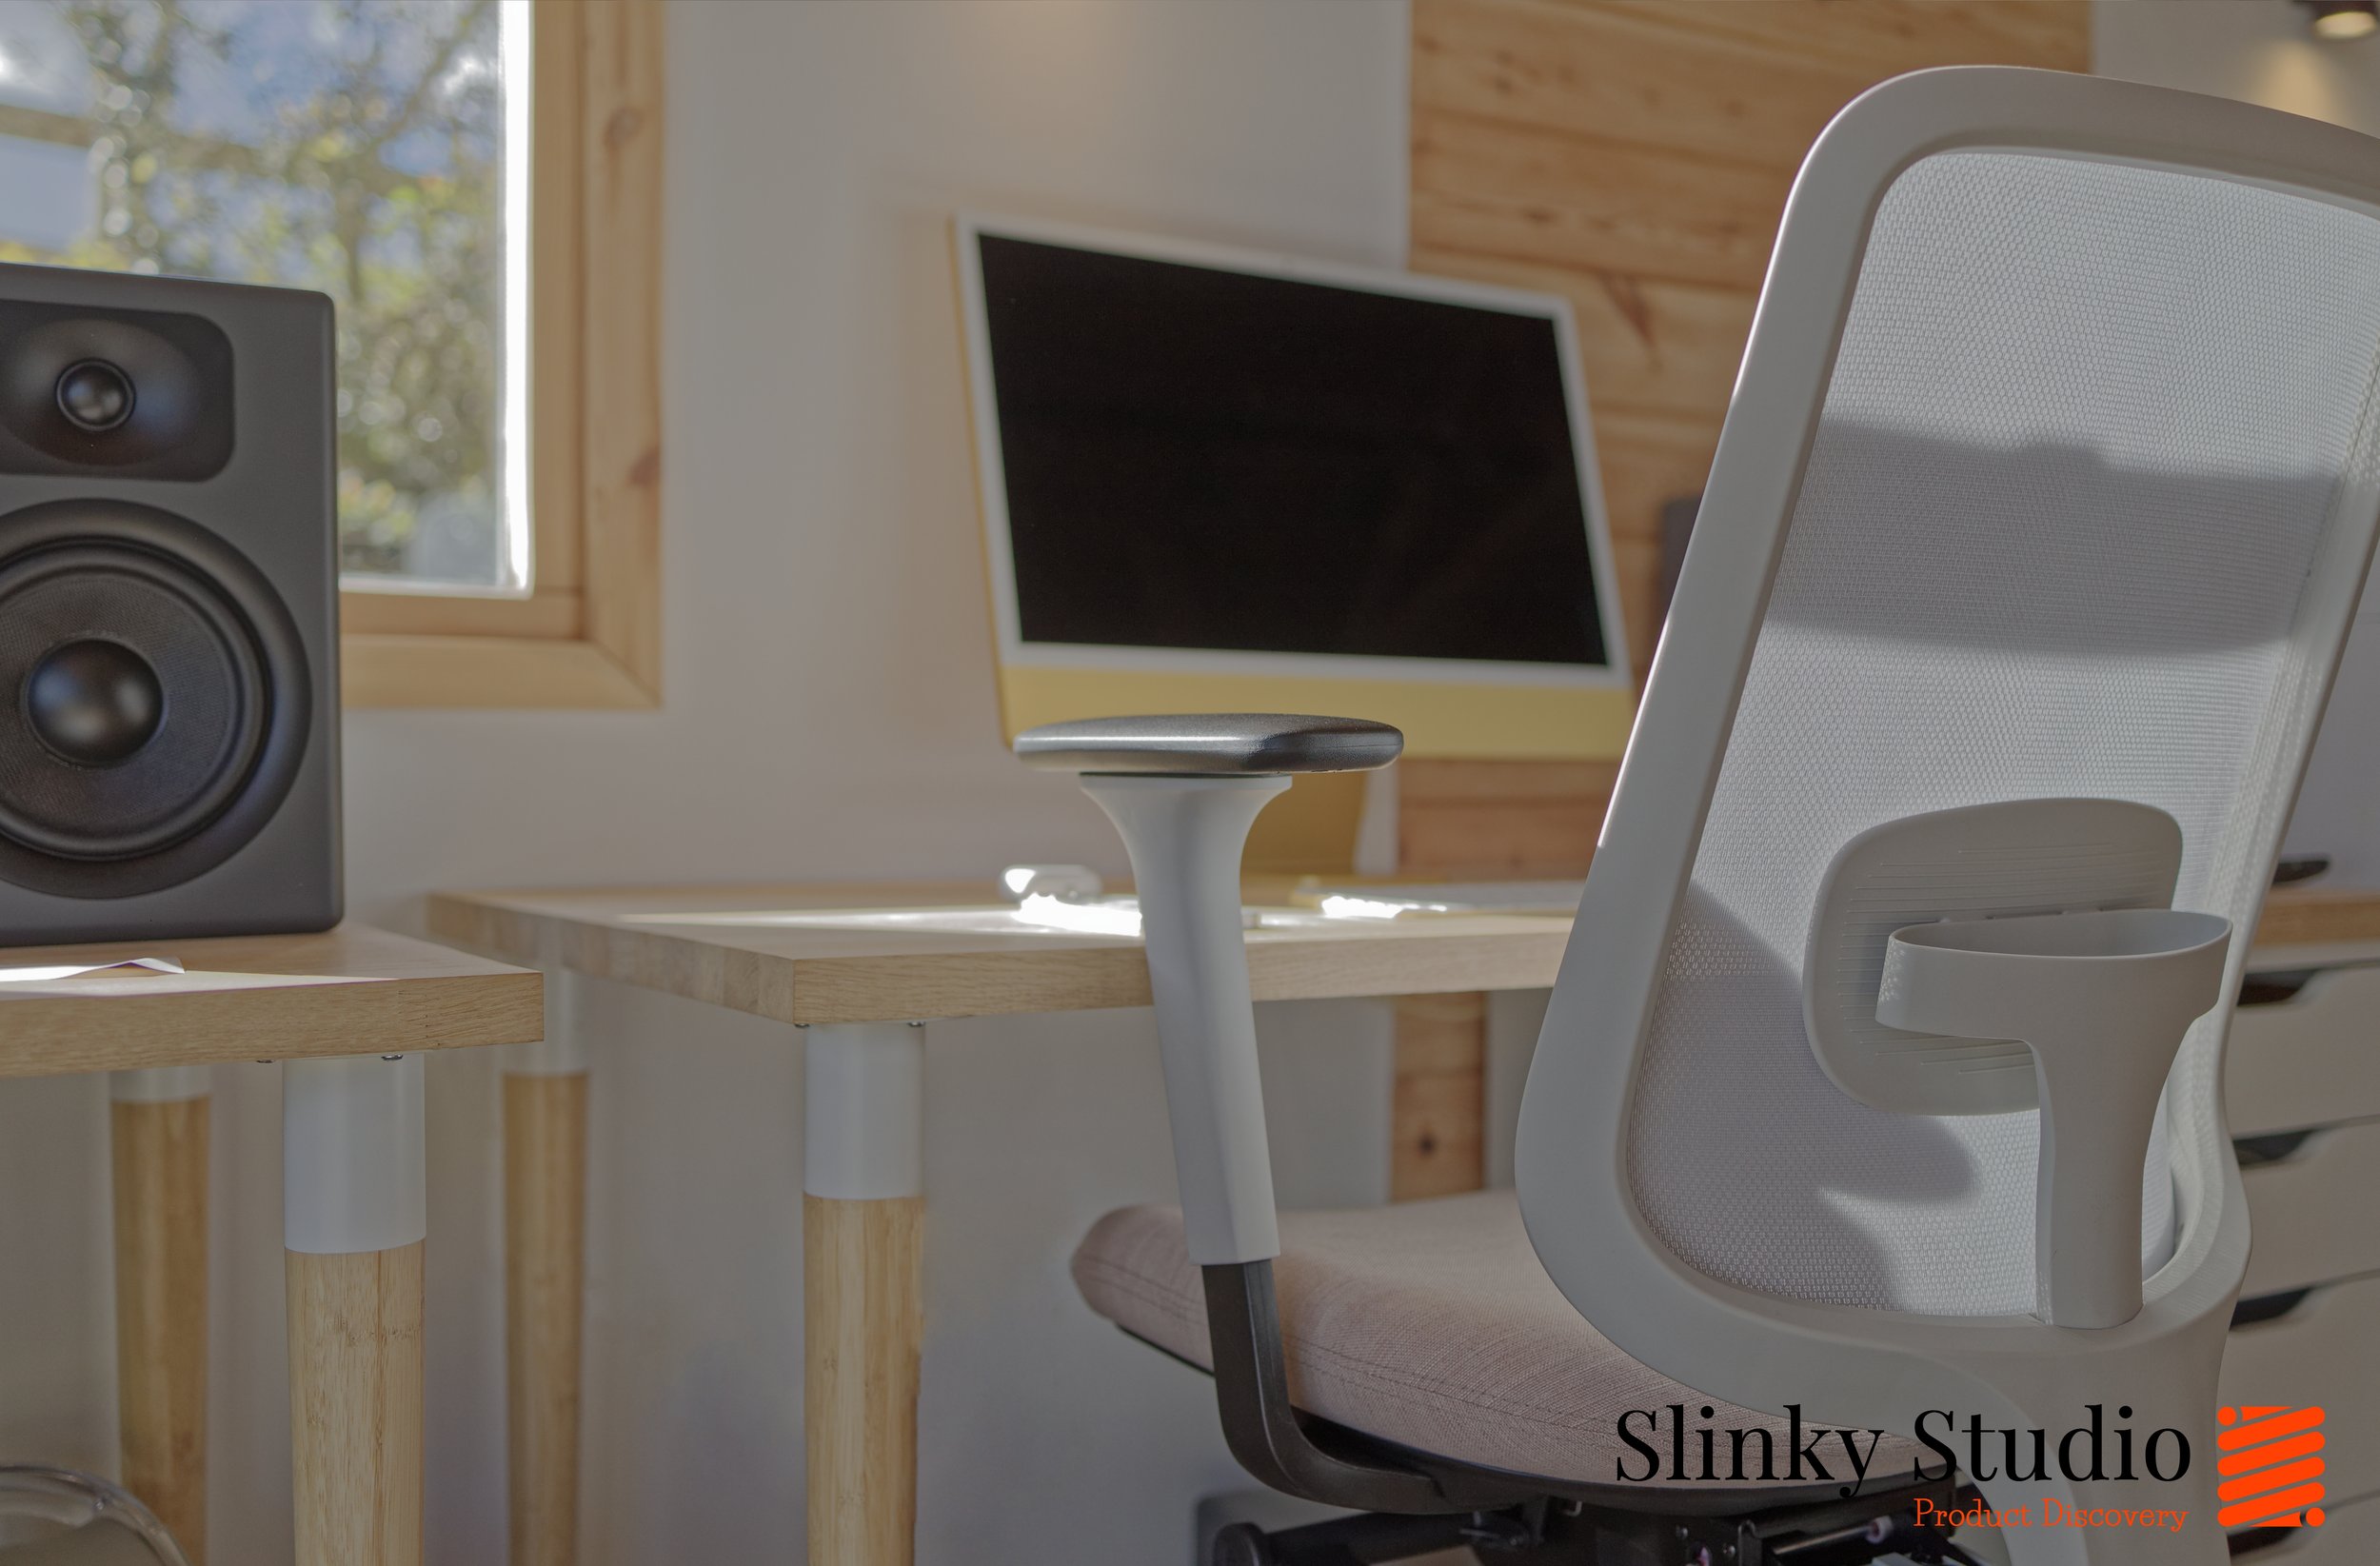 Slouch Chair Task One Grey Frame Close Up Mesh Back Pink Cushion Oak Desks in a Scandi Nordic Studio Enviroment with yellow iMac Side Angle.jpg